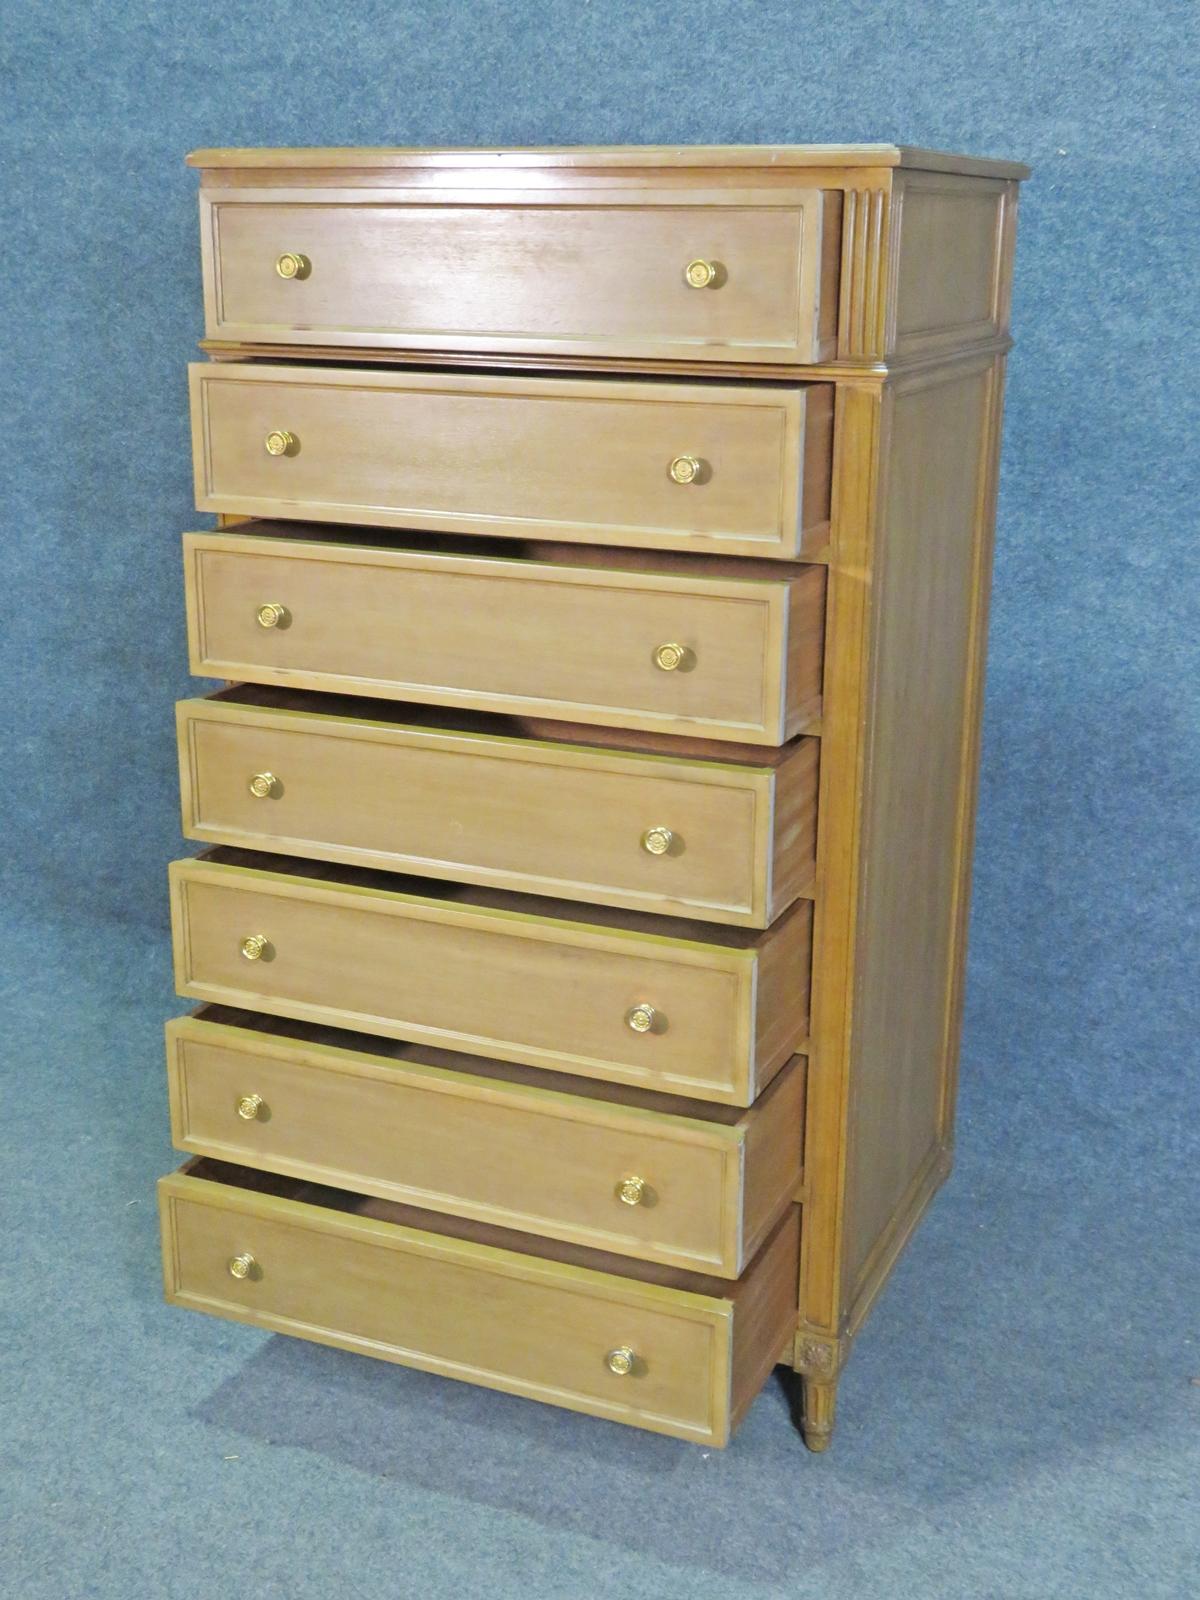 Maison Jansen Style Tall Chest of Drawers 1 of 2 Similar Chests In Good Condition In Swedesboro, NJ